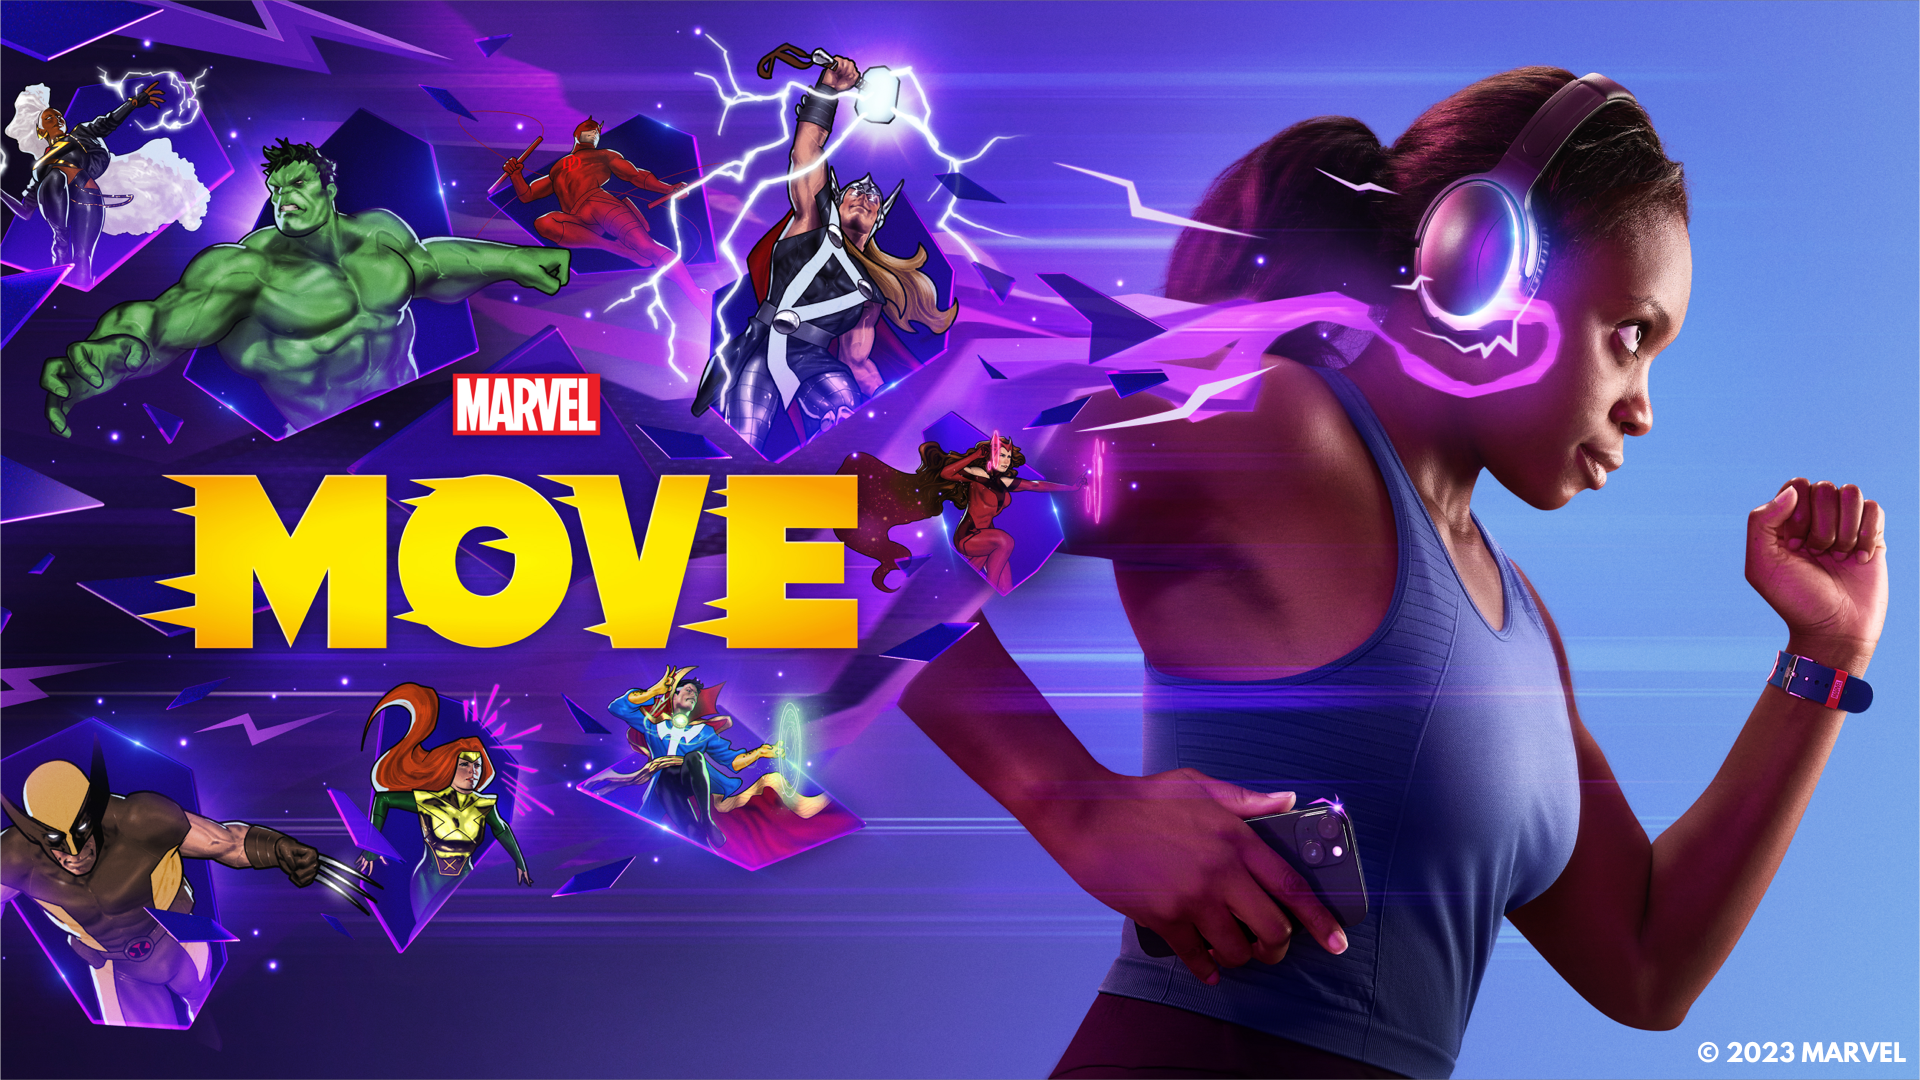 Marvel Move Promotional Image 1920x1080.png